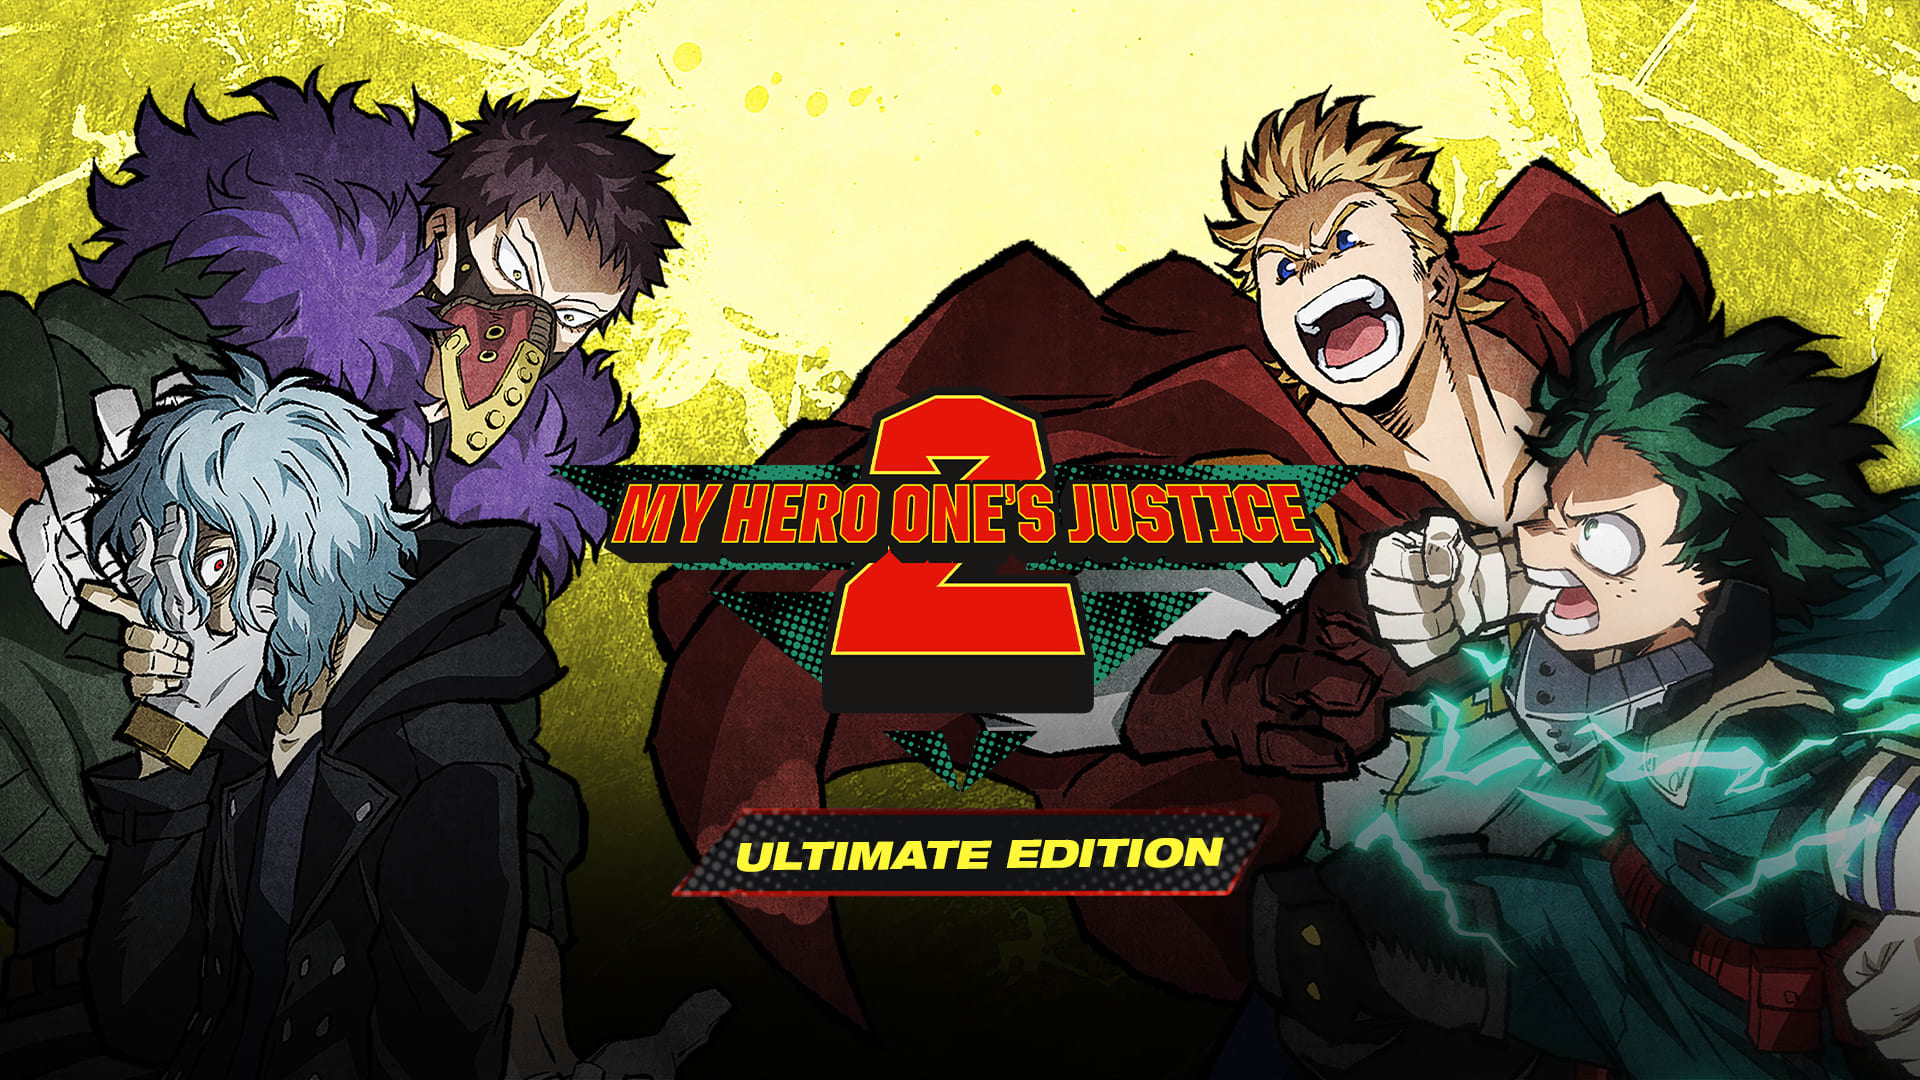 MY HERO ONE'S JUSTICE 2 Ultimate Edition 1